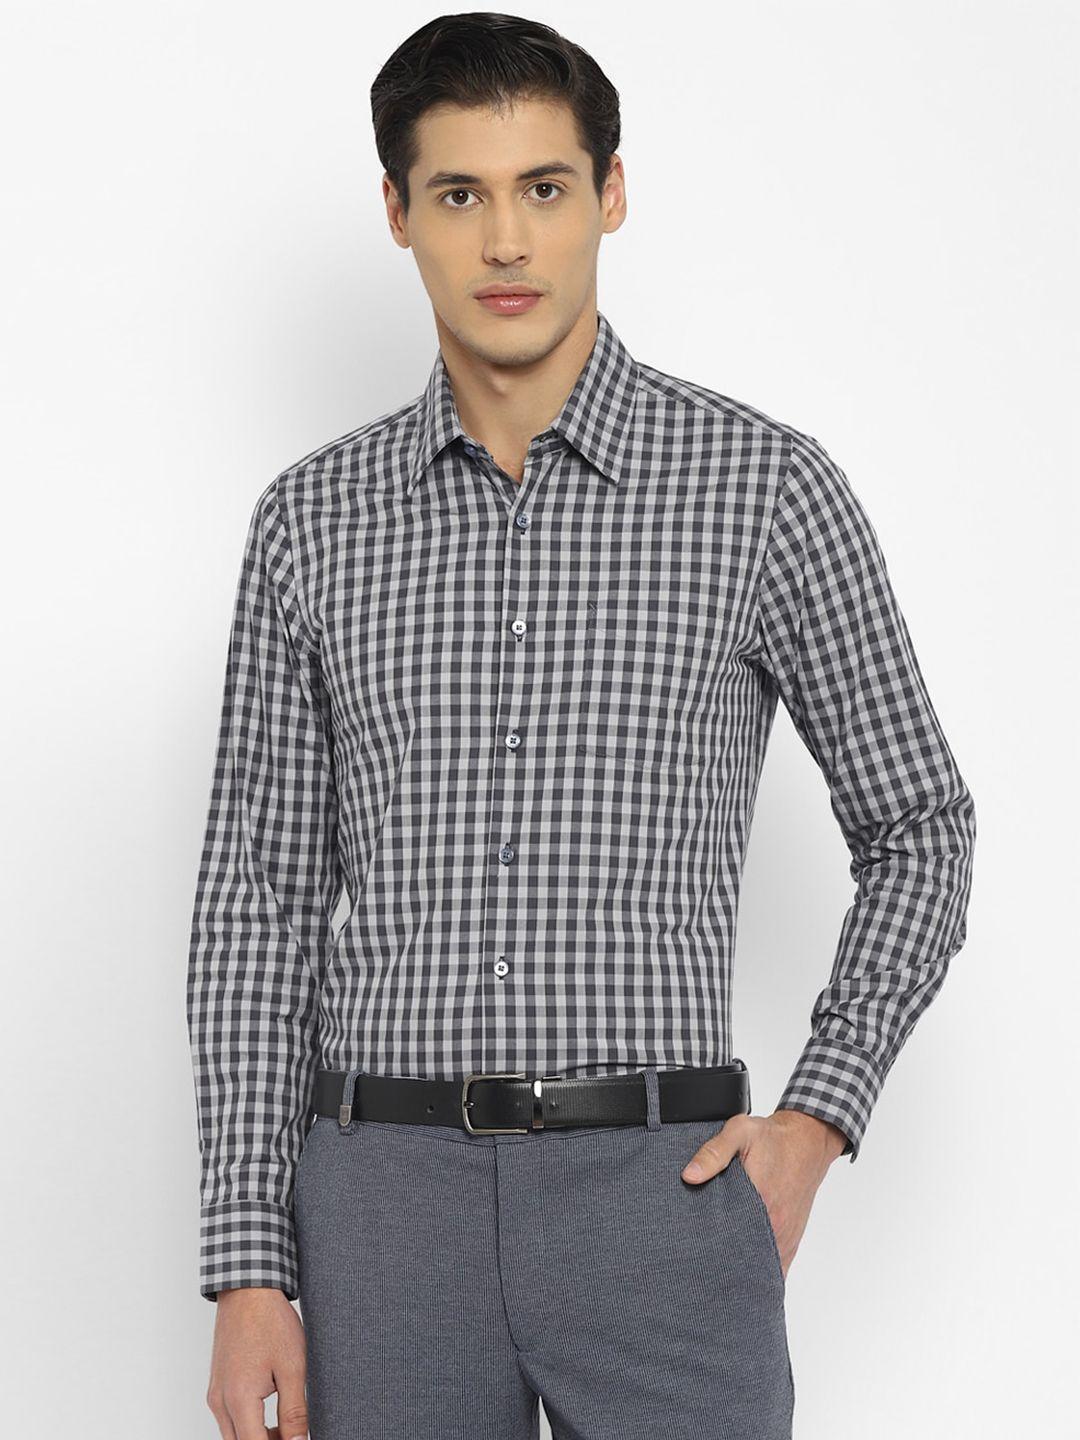 top brass checked cotton formal shirt